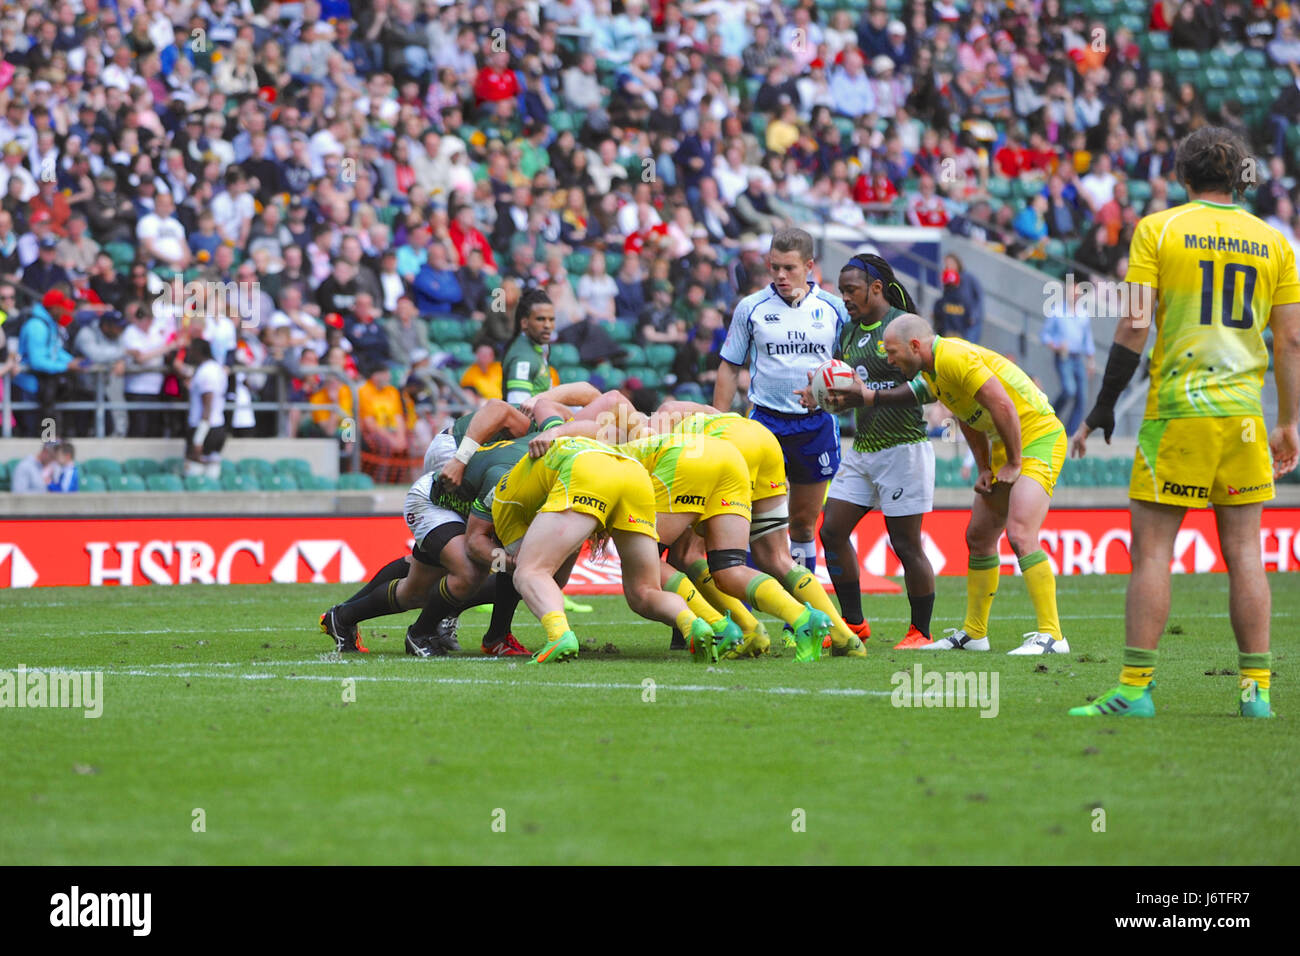 London, UK. 21st May, 2017. Branco Du Preez (RSA) about to toss the ball into a scrum during the Australia V South Africa match at Twickenham Stadium, London, UK. The match was part of the the finale of the HSBC World Rugby Sevens Series.  The match took place as part of the finale of the HSBC World Rugby Sevens Series. The series culmination saw 17 international teams competing (in rapid 14 minute long matches) to be the London title champions. Credit: Michael Preston/Alamy Live News Stock Photo